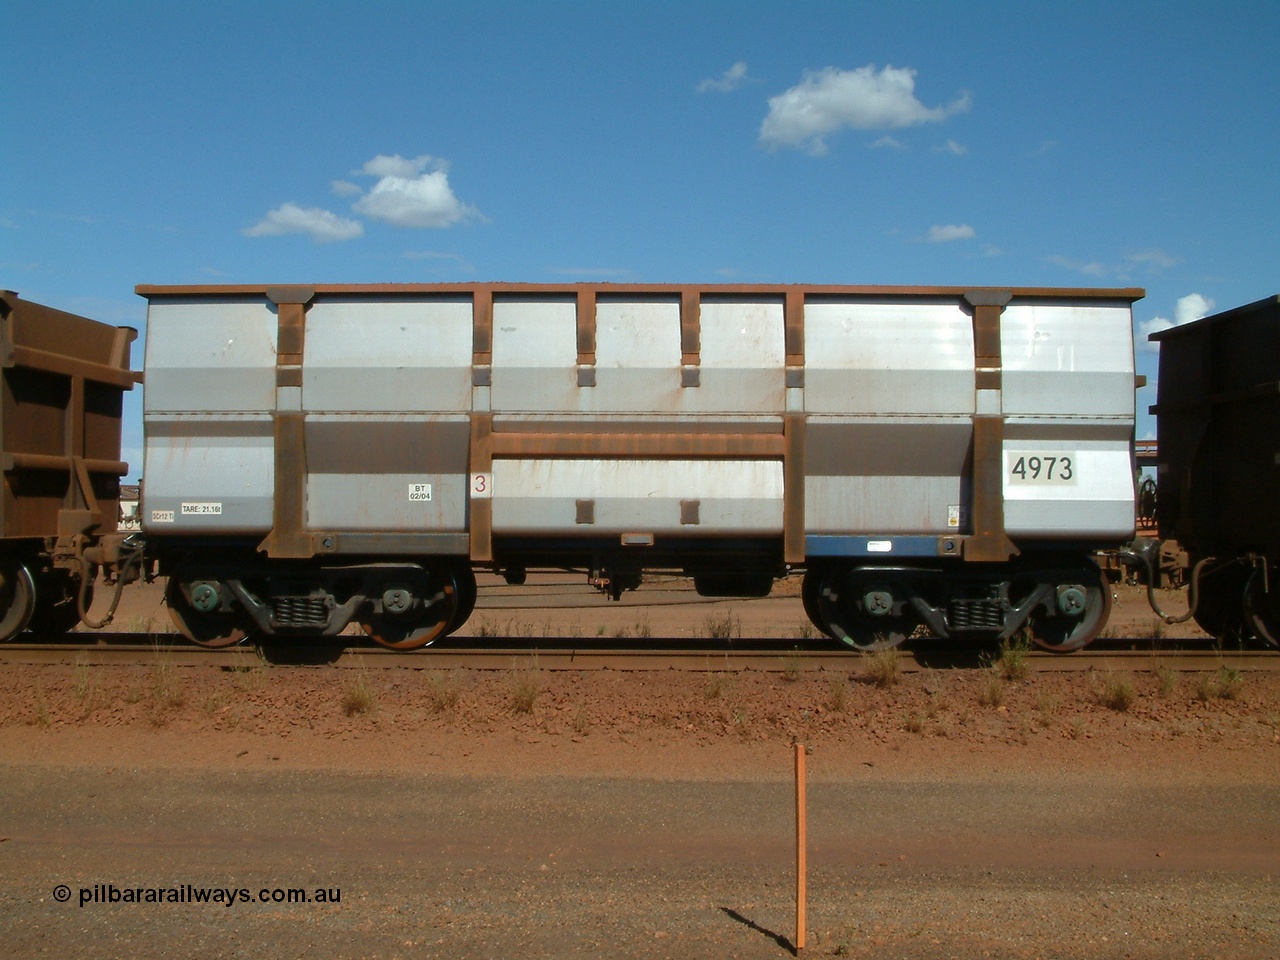 040412 143652
Nelson Point, Goninan built, Lynx Engineering designed ore waggon 4973 made from 5Cr12Ti stainless steel these waggons are known as Golynx waggons, asset number 2032597 with build date 02/2004. 12th April 2004.
Keywords: 4973;Goninan-WA;Golynx;BHP-ore-waggon;